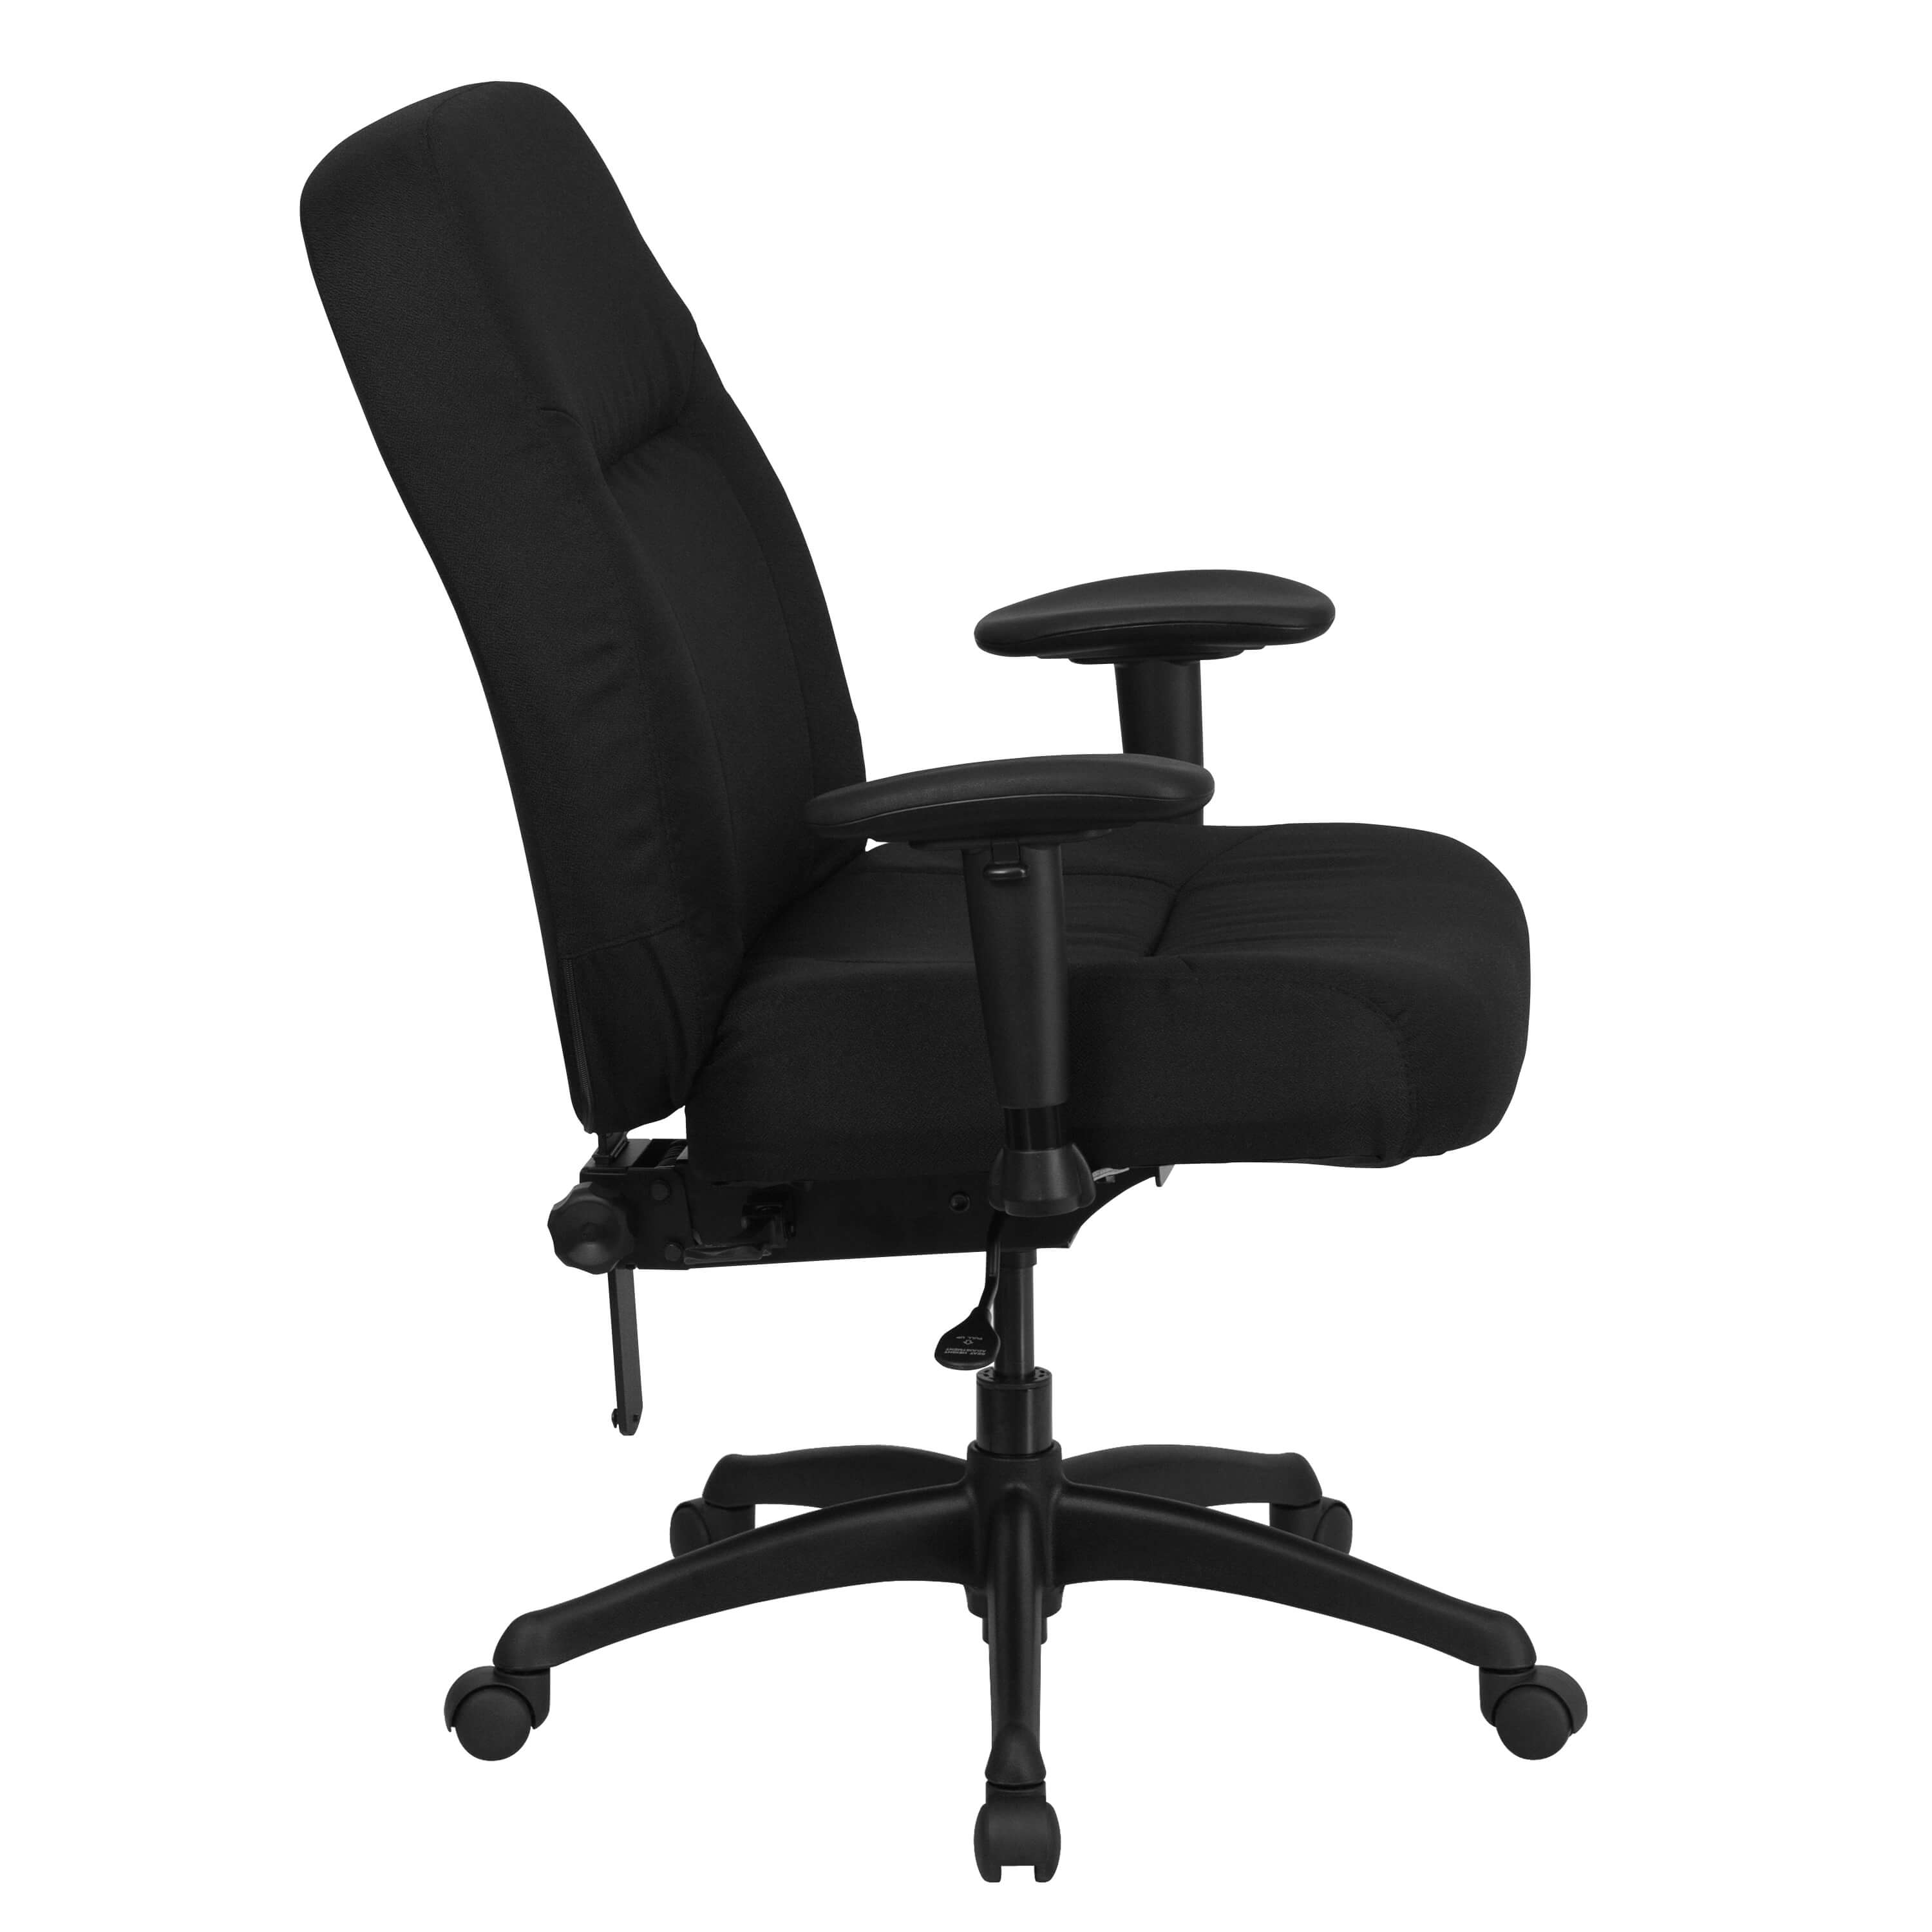 Heavy weight capacity office chair side view